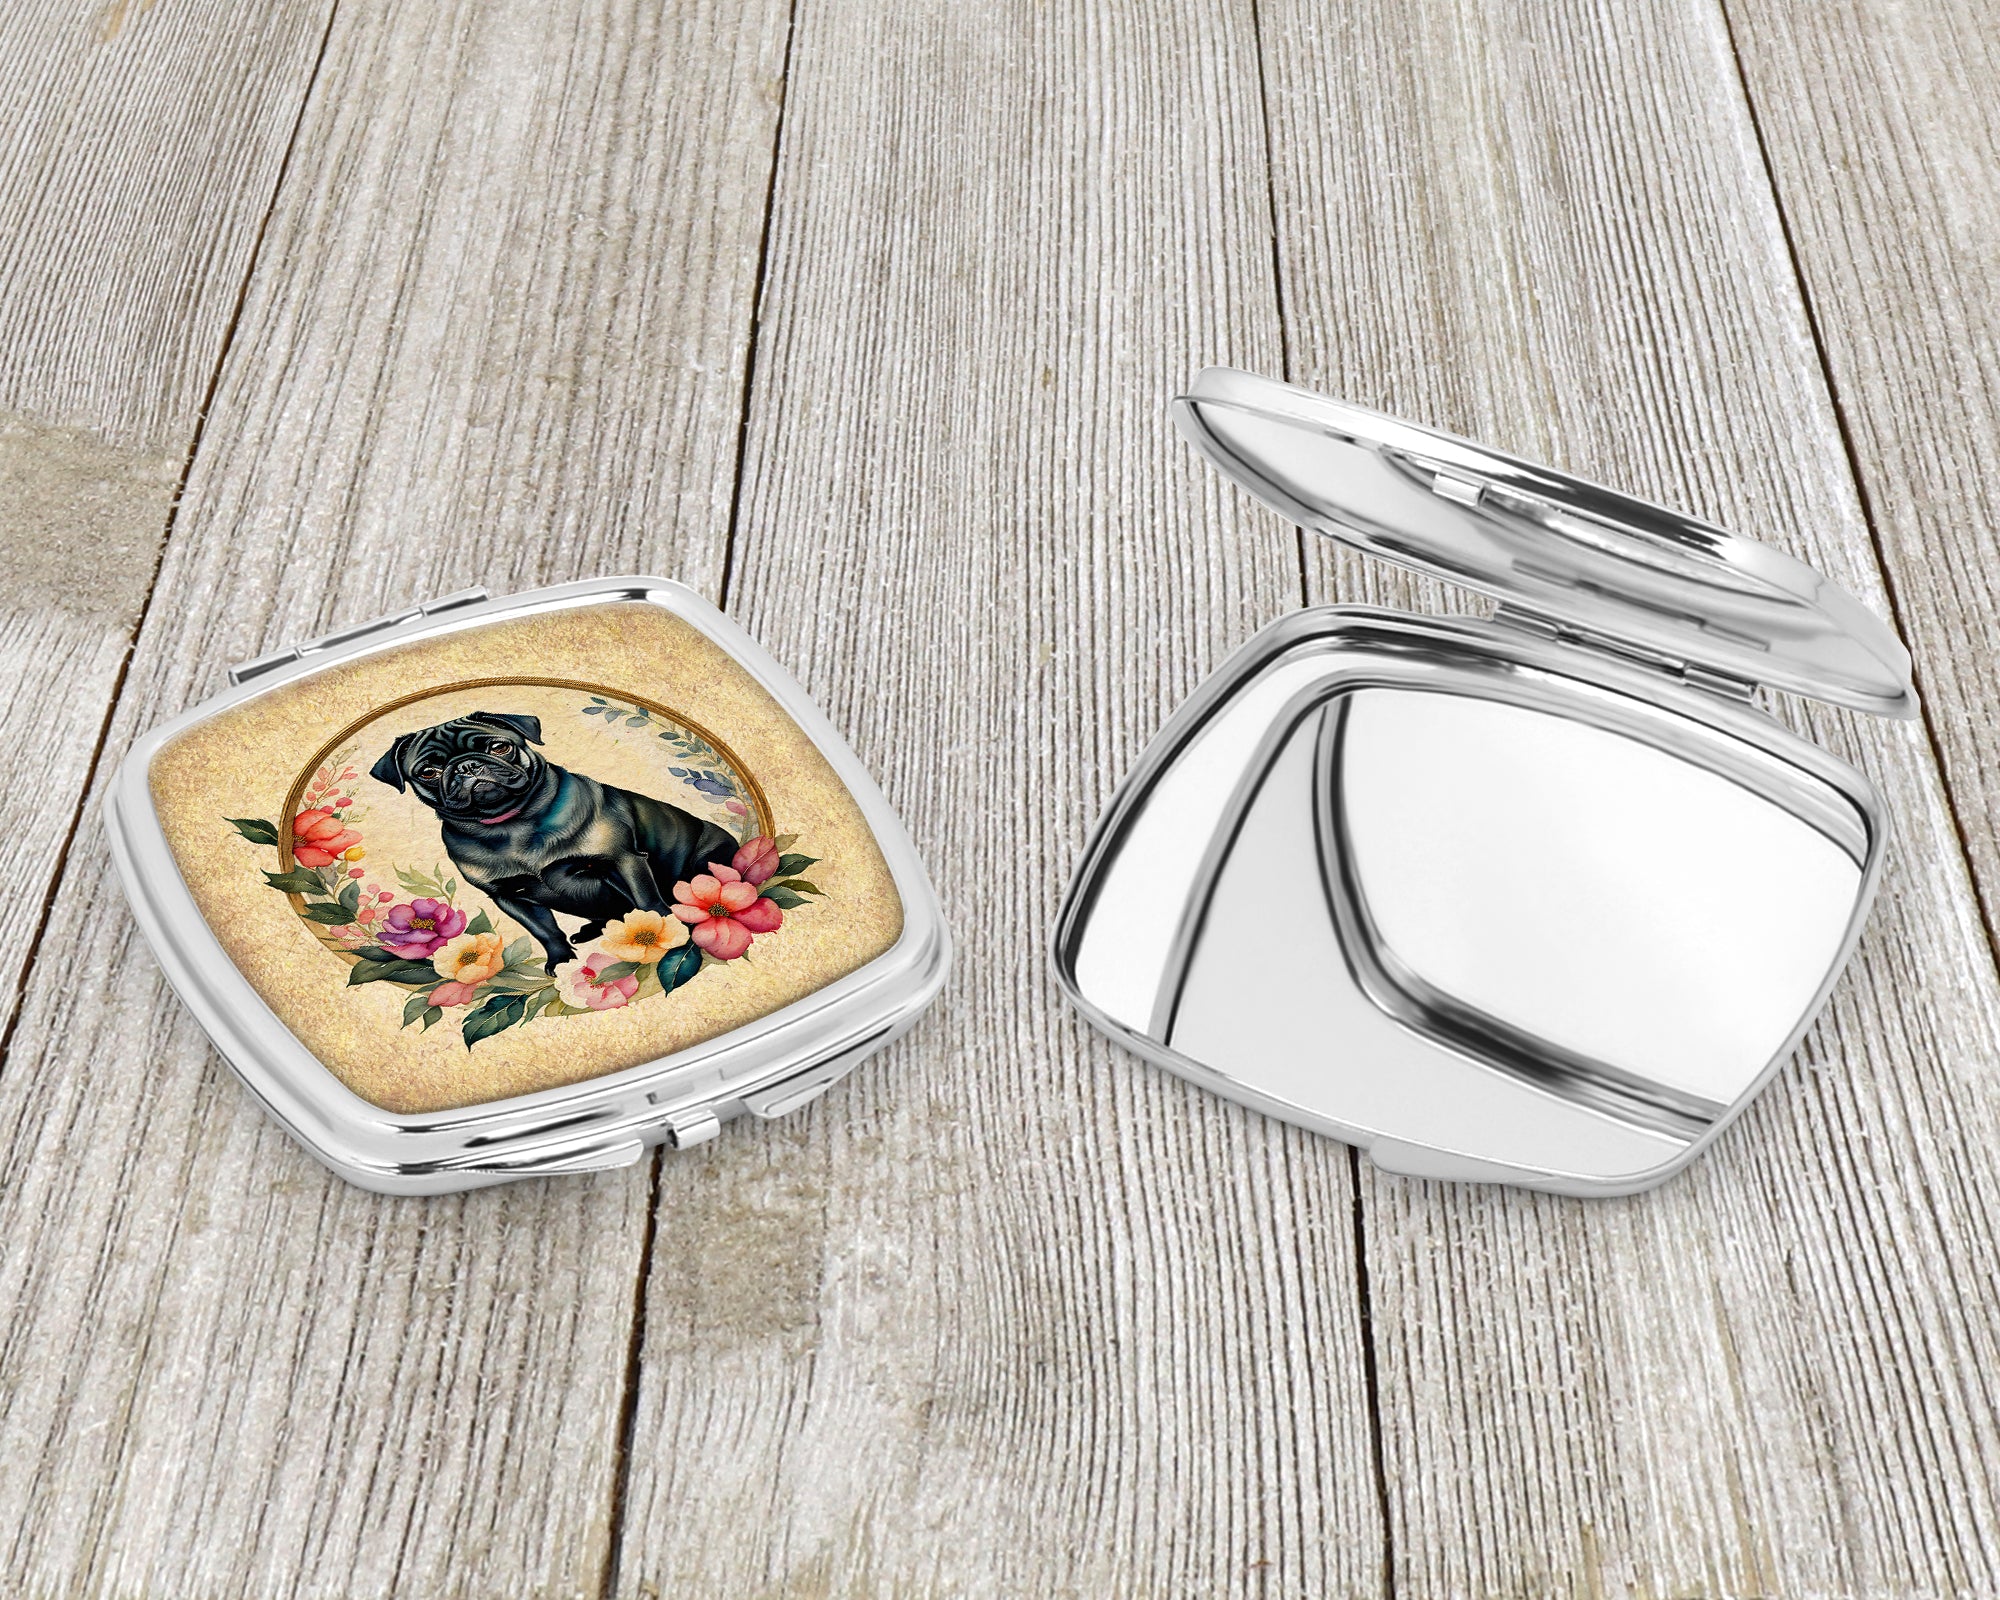 Black Pug and Flowers Compact Mirror